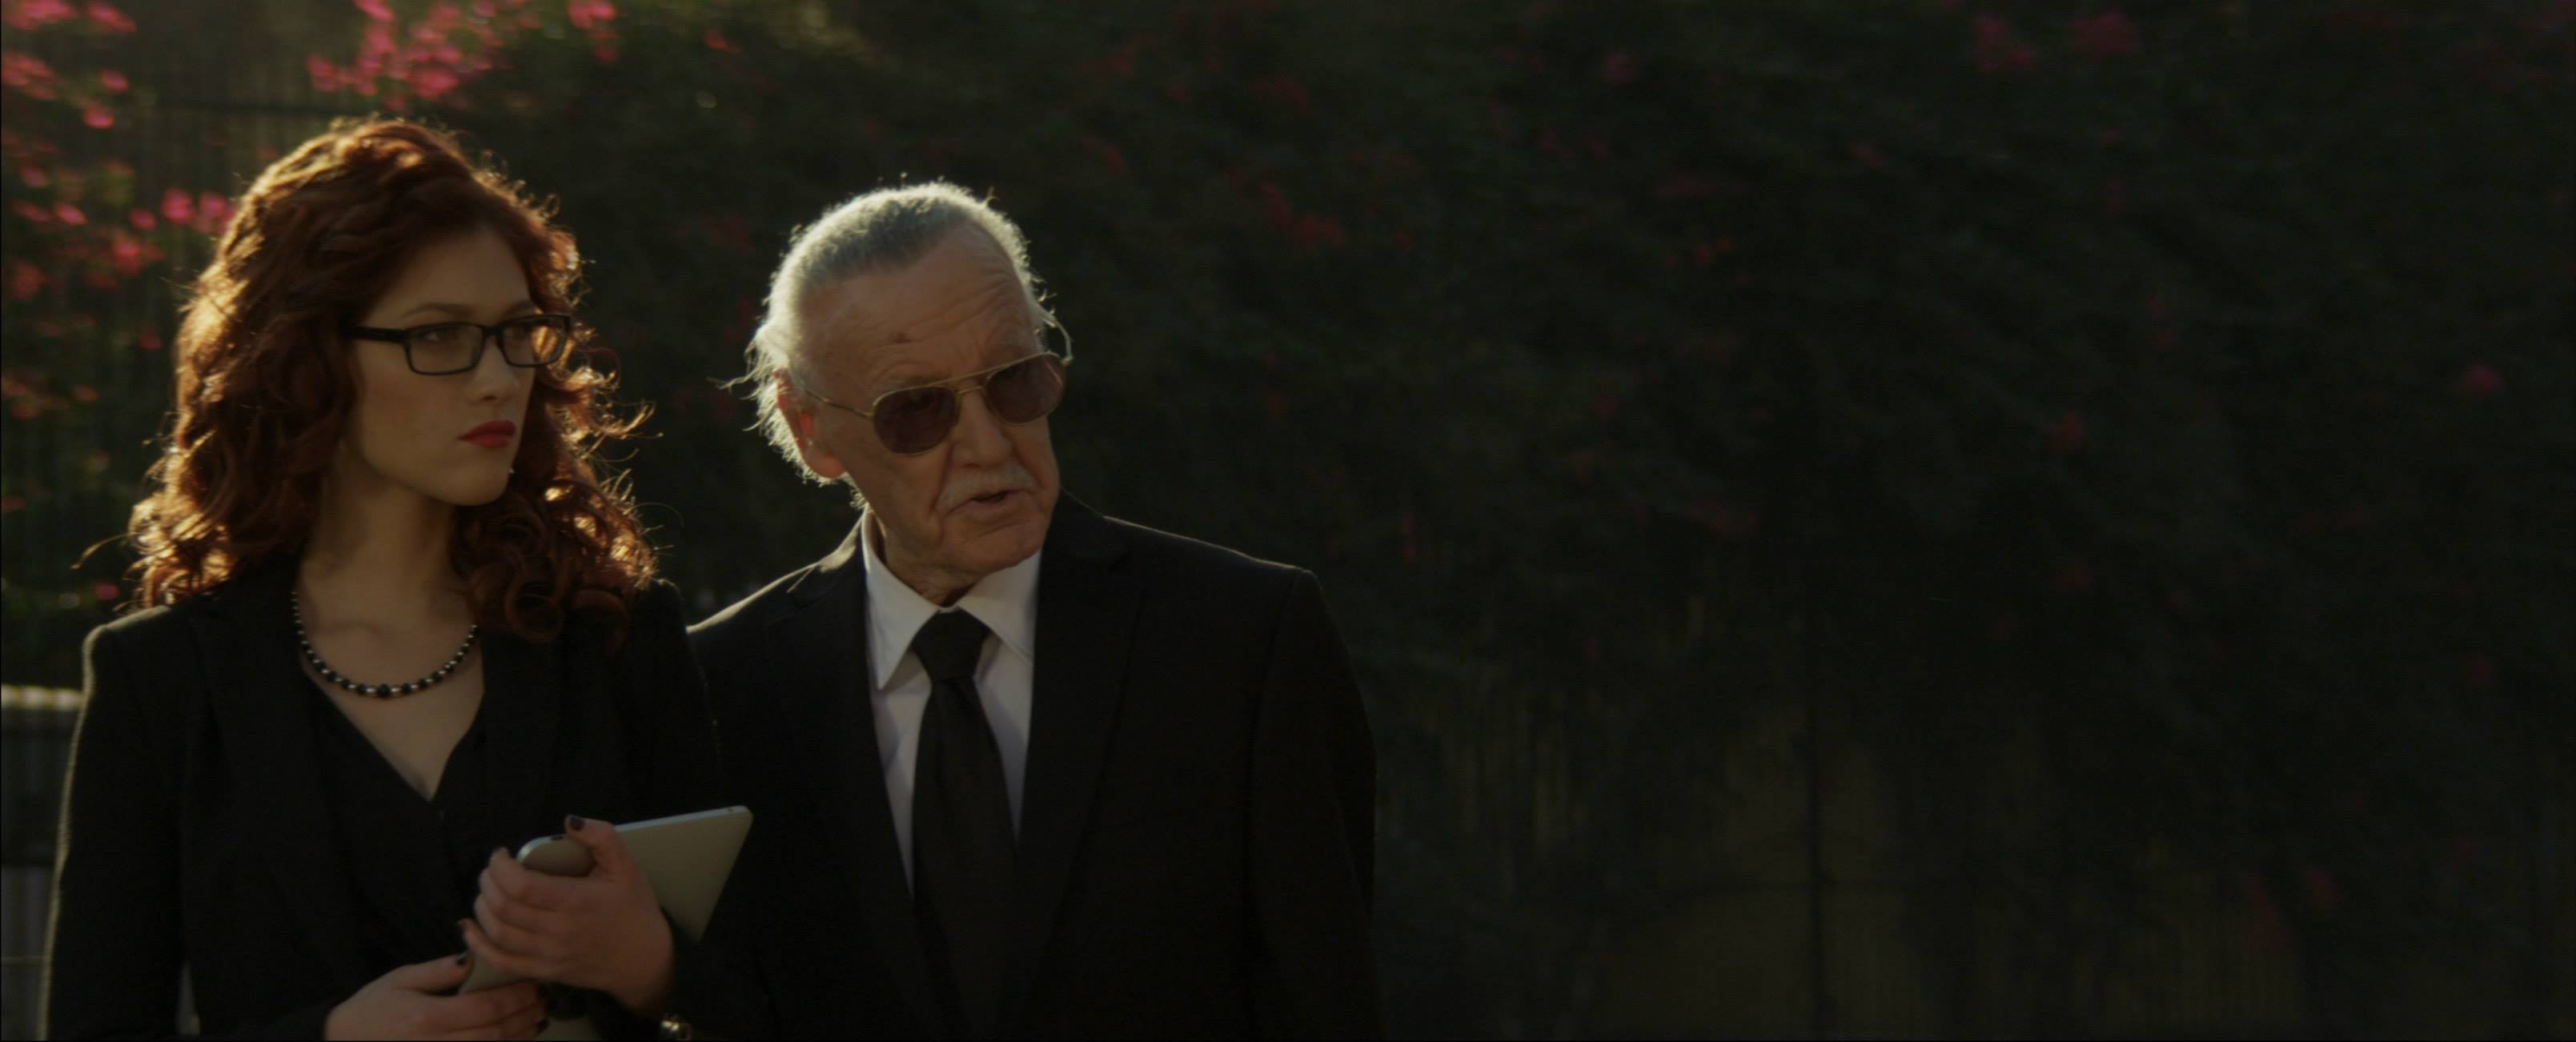 Nicole Fox and Stan Lee for Dr Pepper and The Avengers